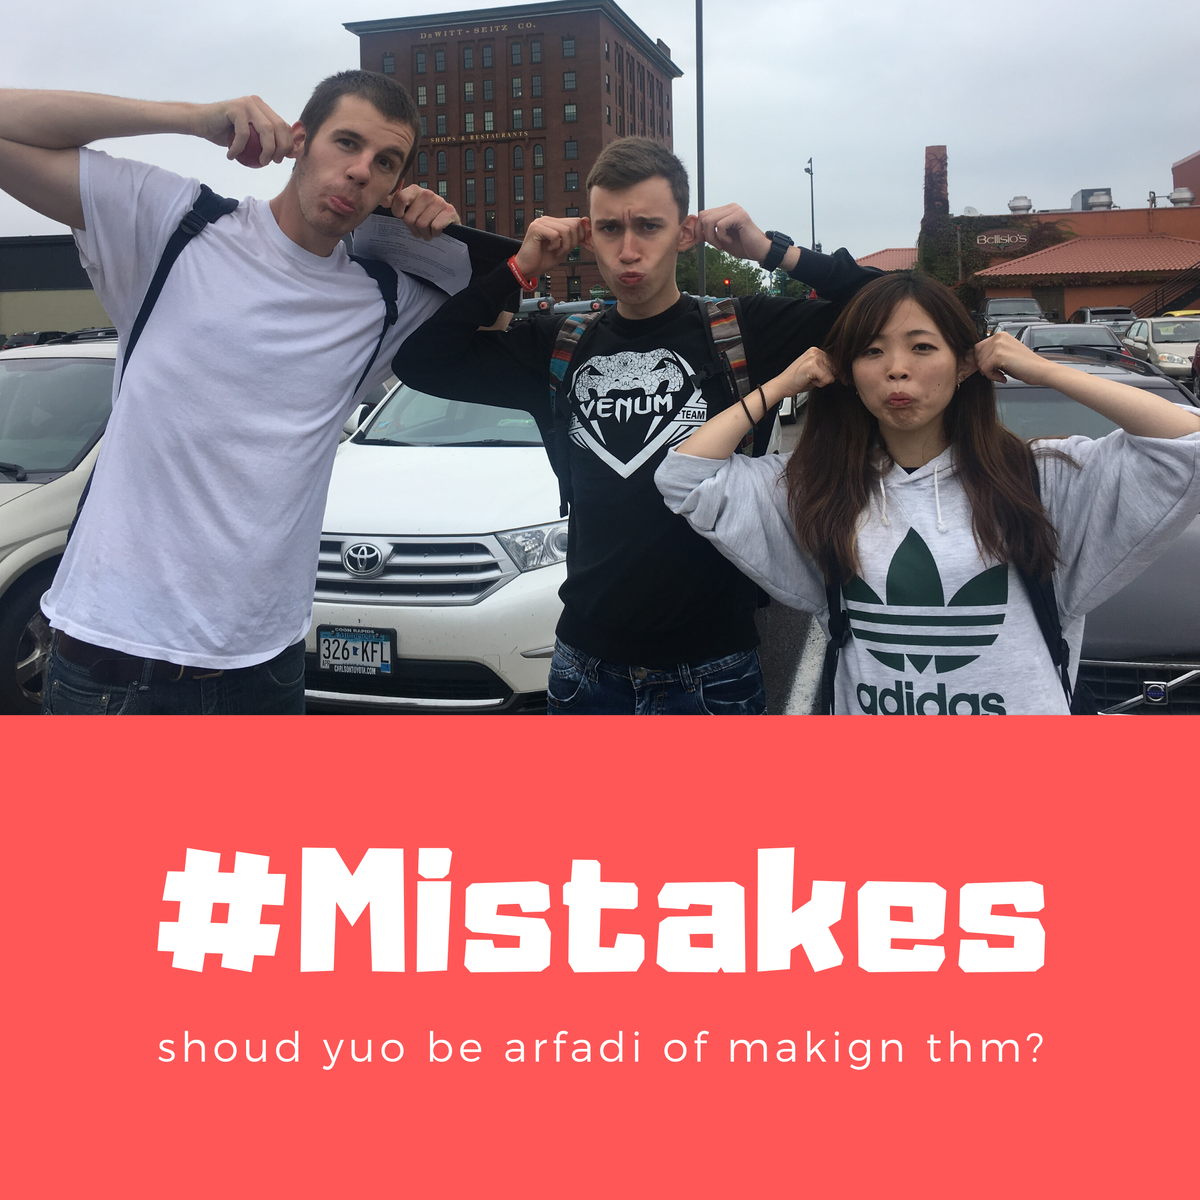 MISTAKES! TO BE AFRAID OR NOT TO BE!